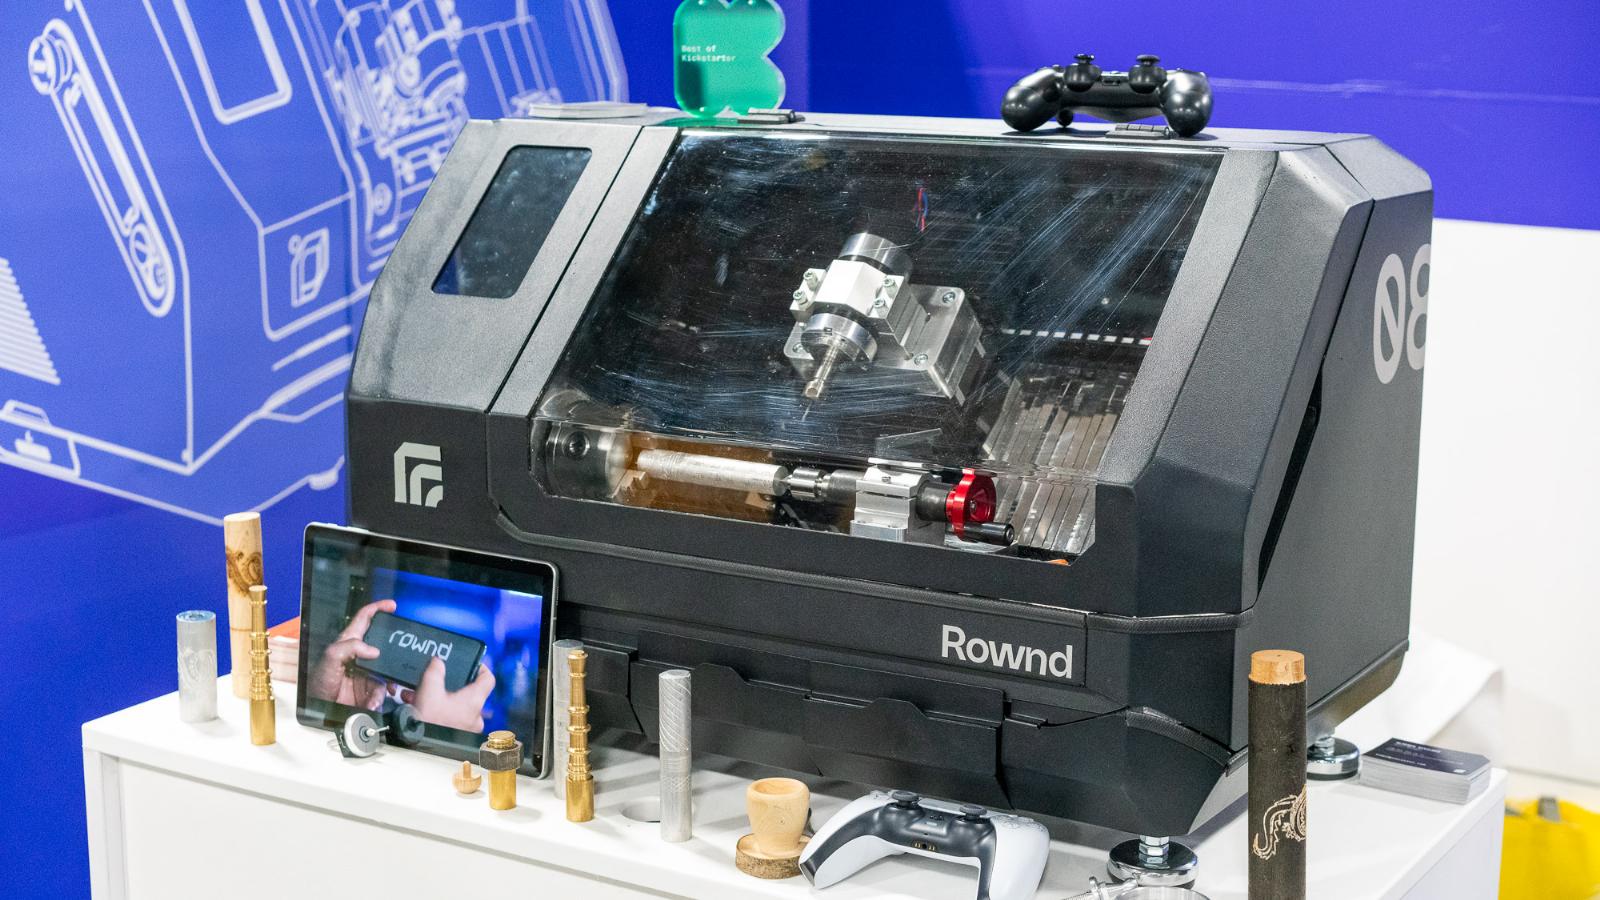 Taking a closer look at the Rownd tabletop CNC lathe